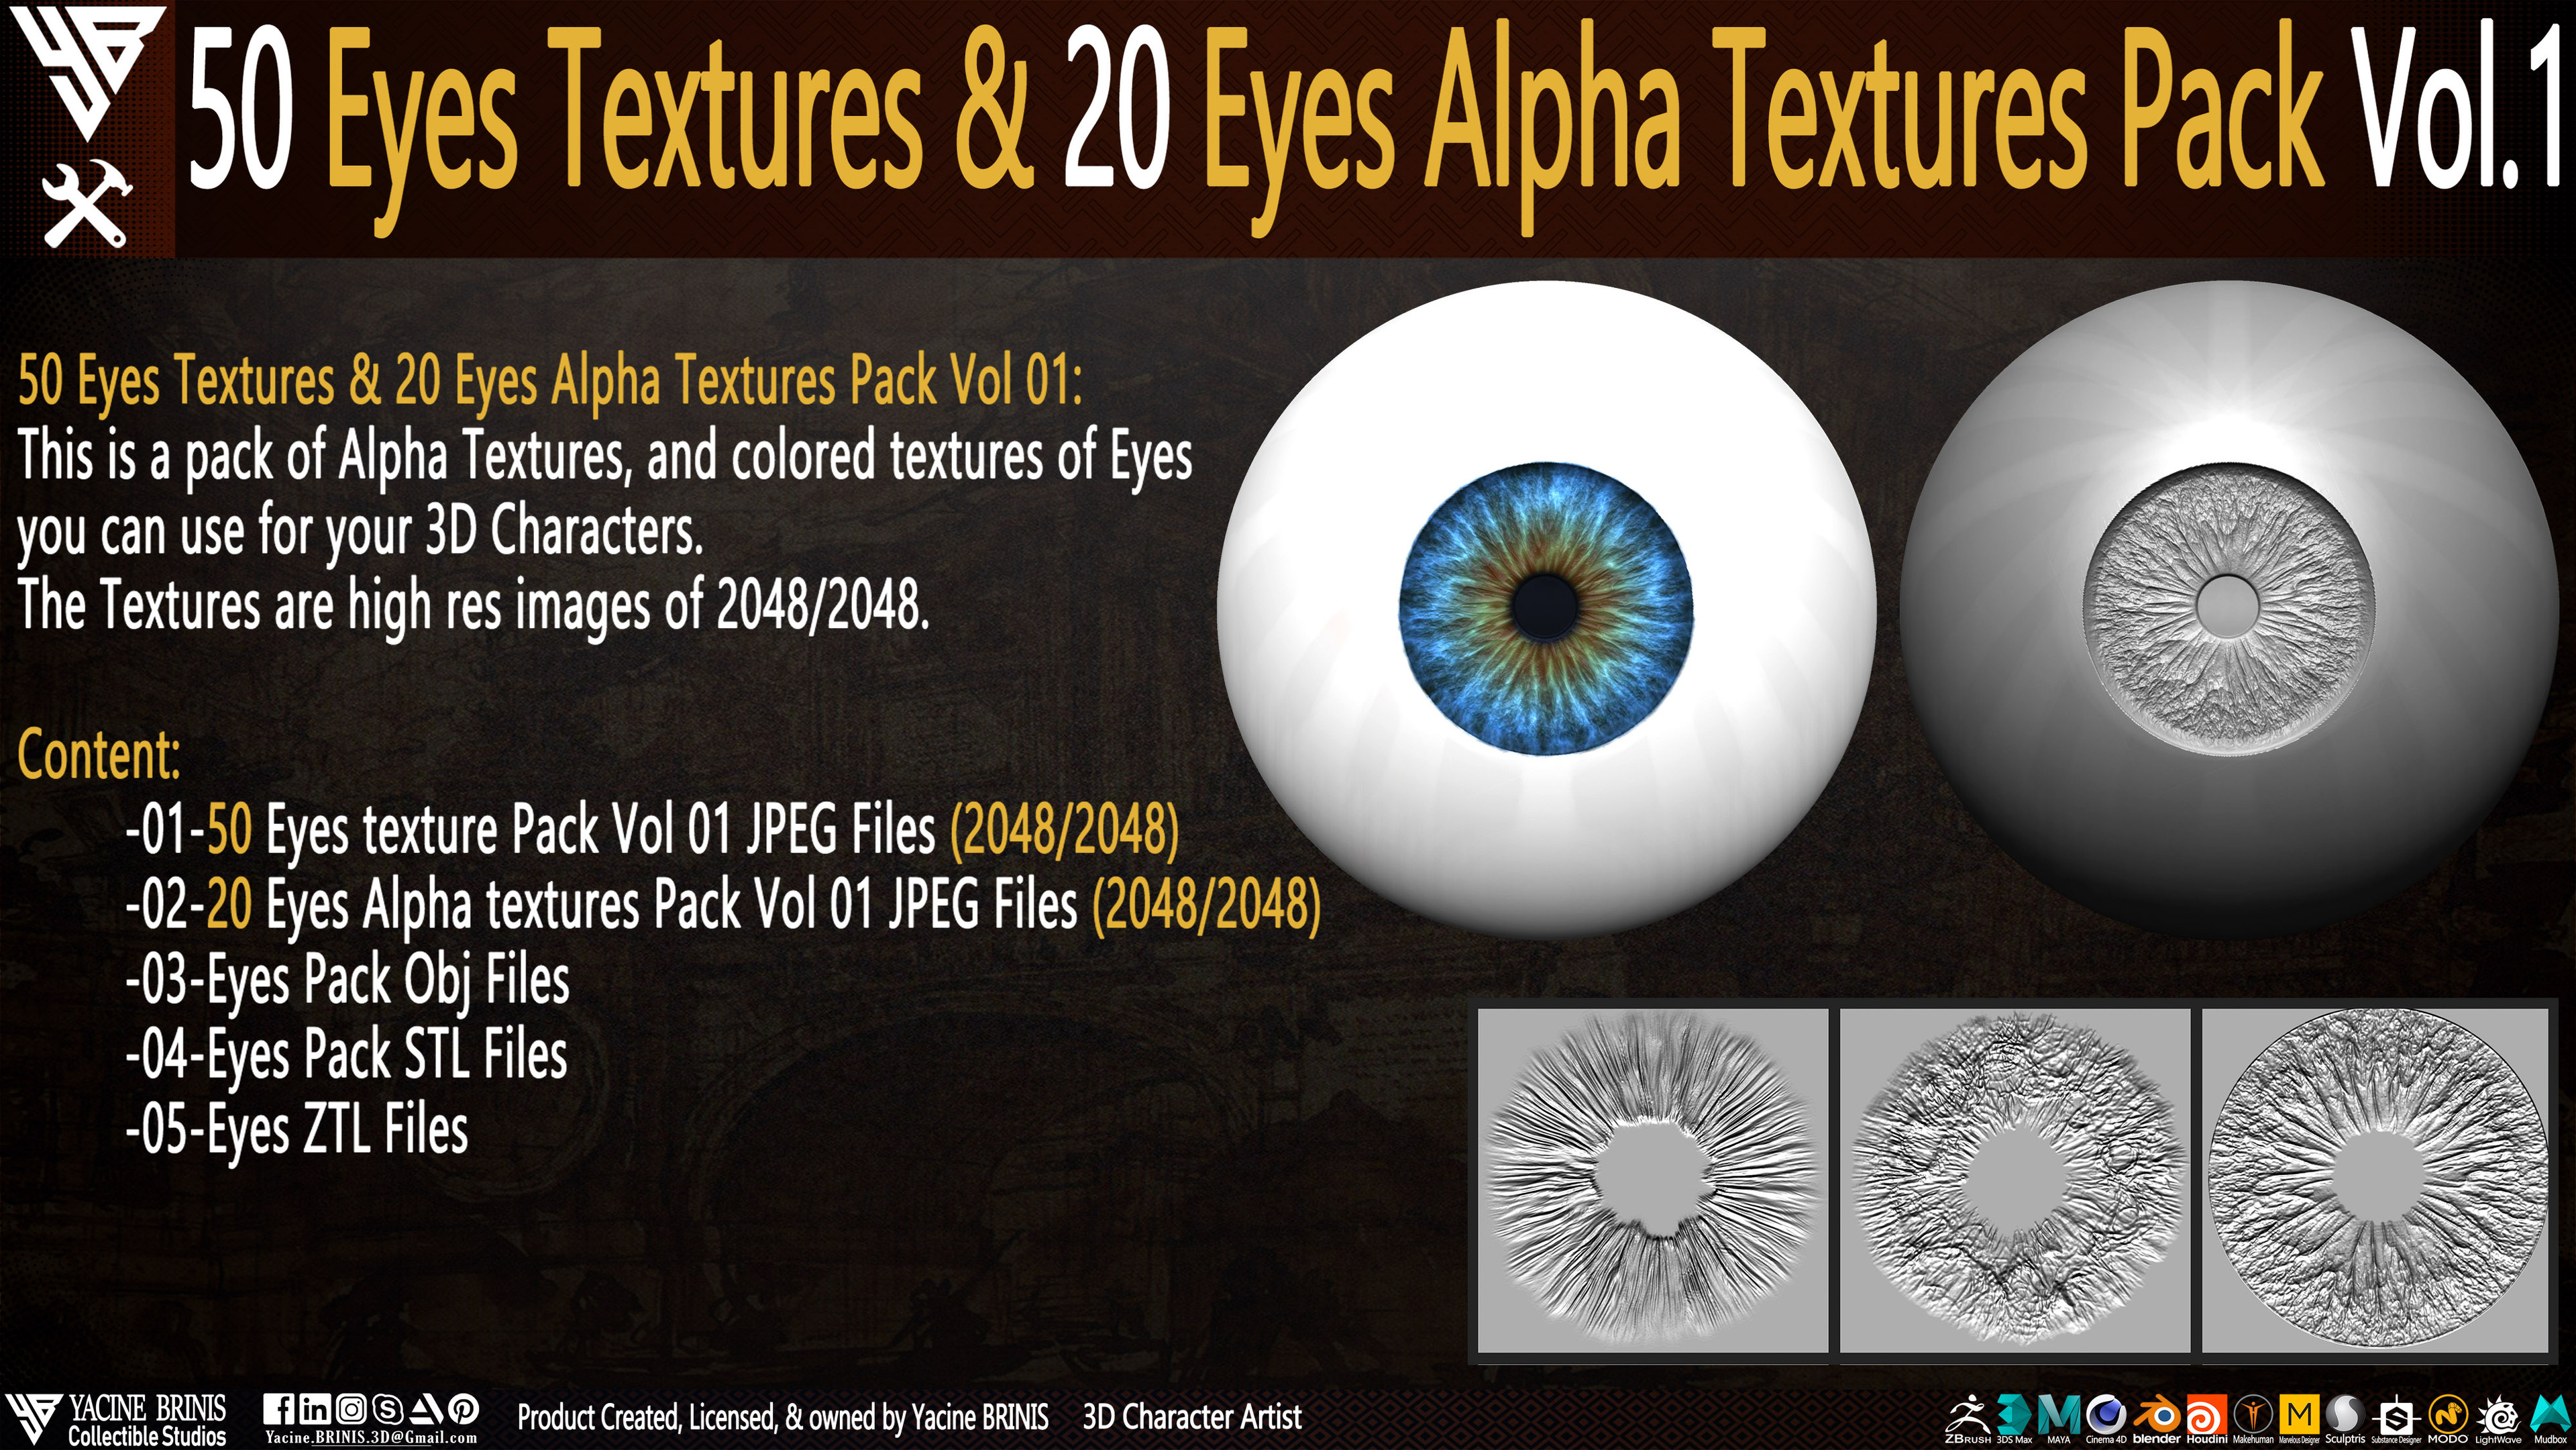 50 Eyes Textures and 20 Eyes Alpha Textures Pack Vol 01 sculpted by Yacine BRINIS Set 10